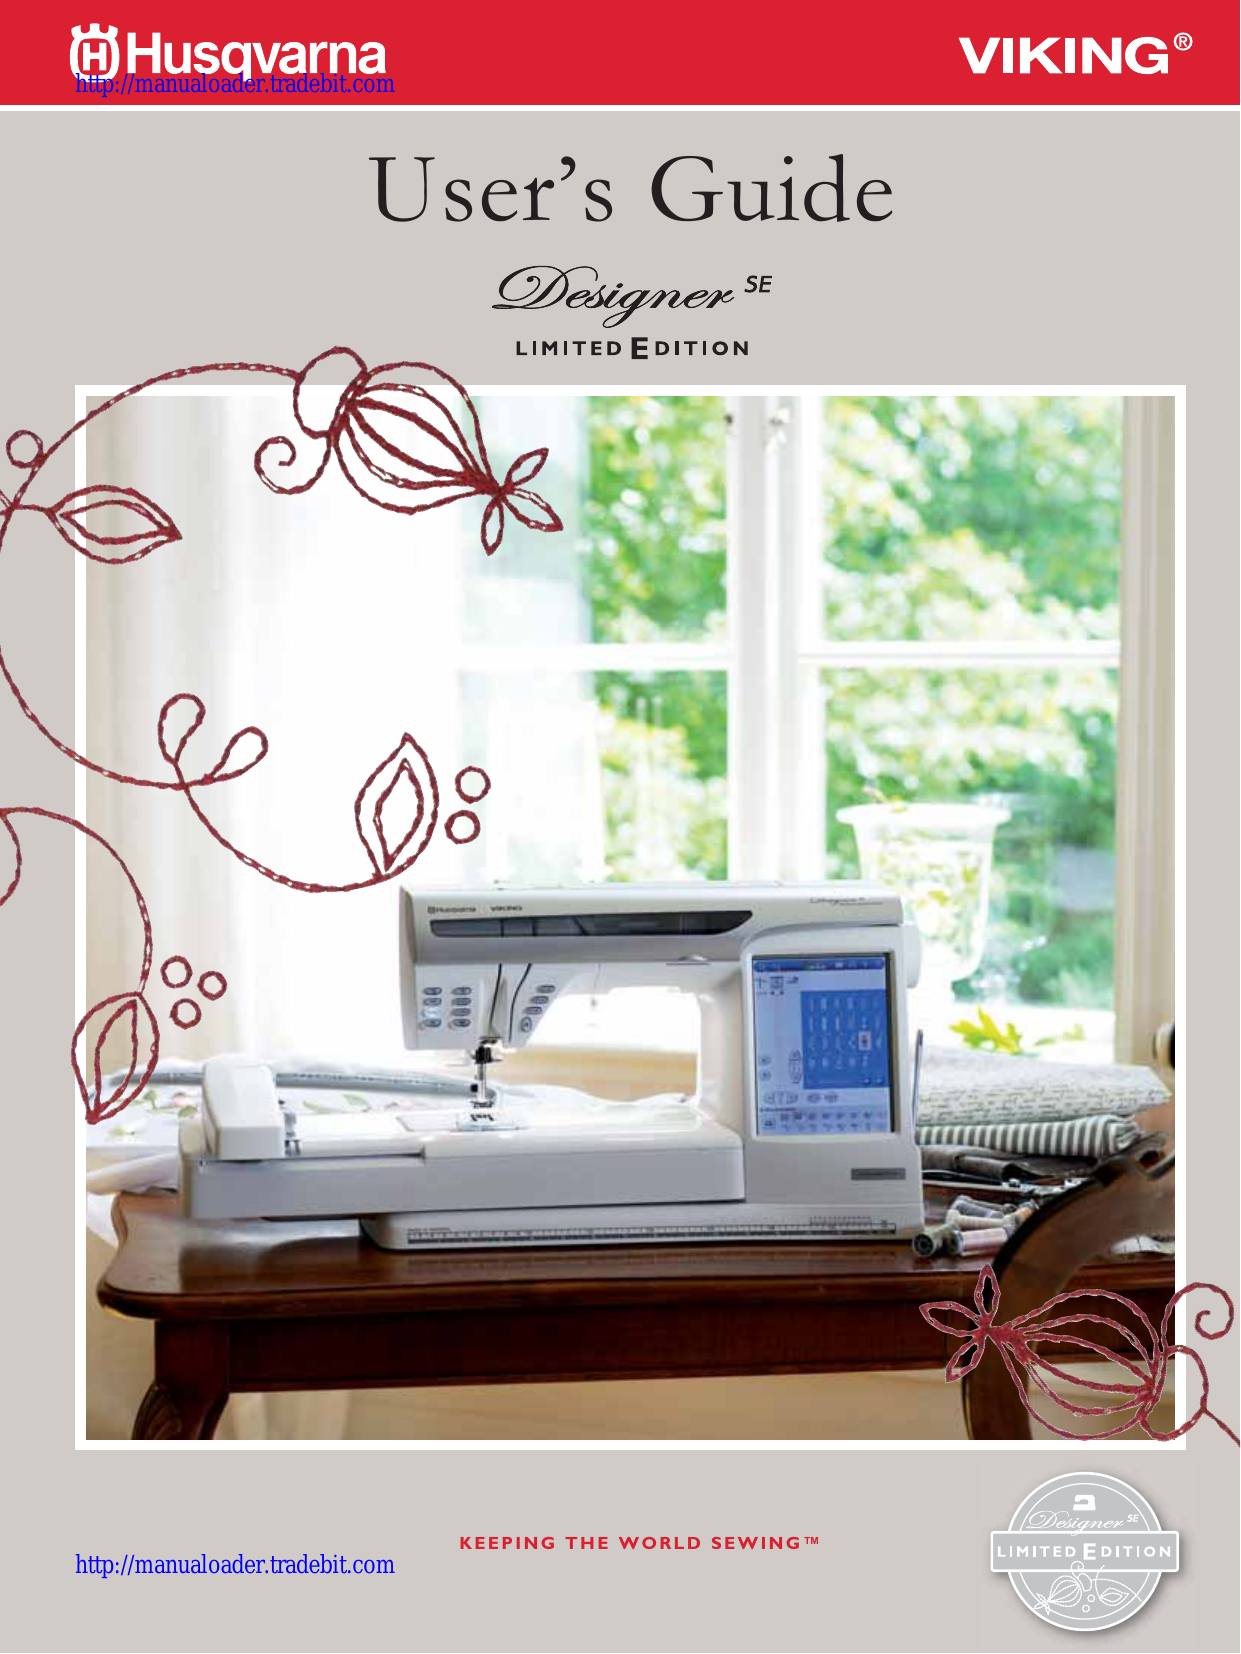 Husqvarna Viking Designer SE limited edition Embroidery and Sewing Machine users guide Preview image 1